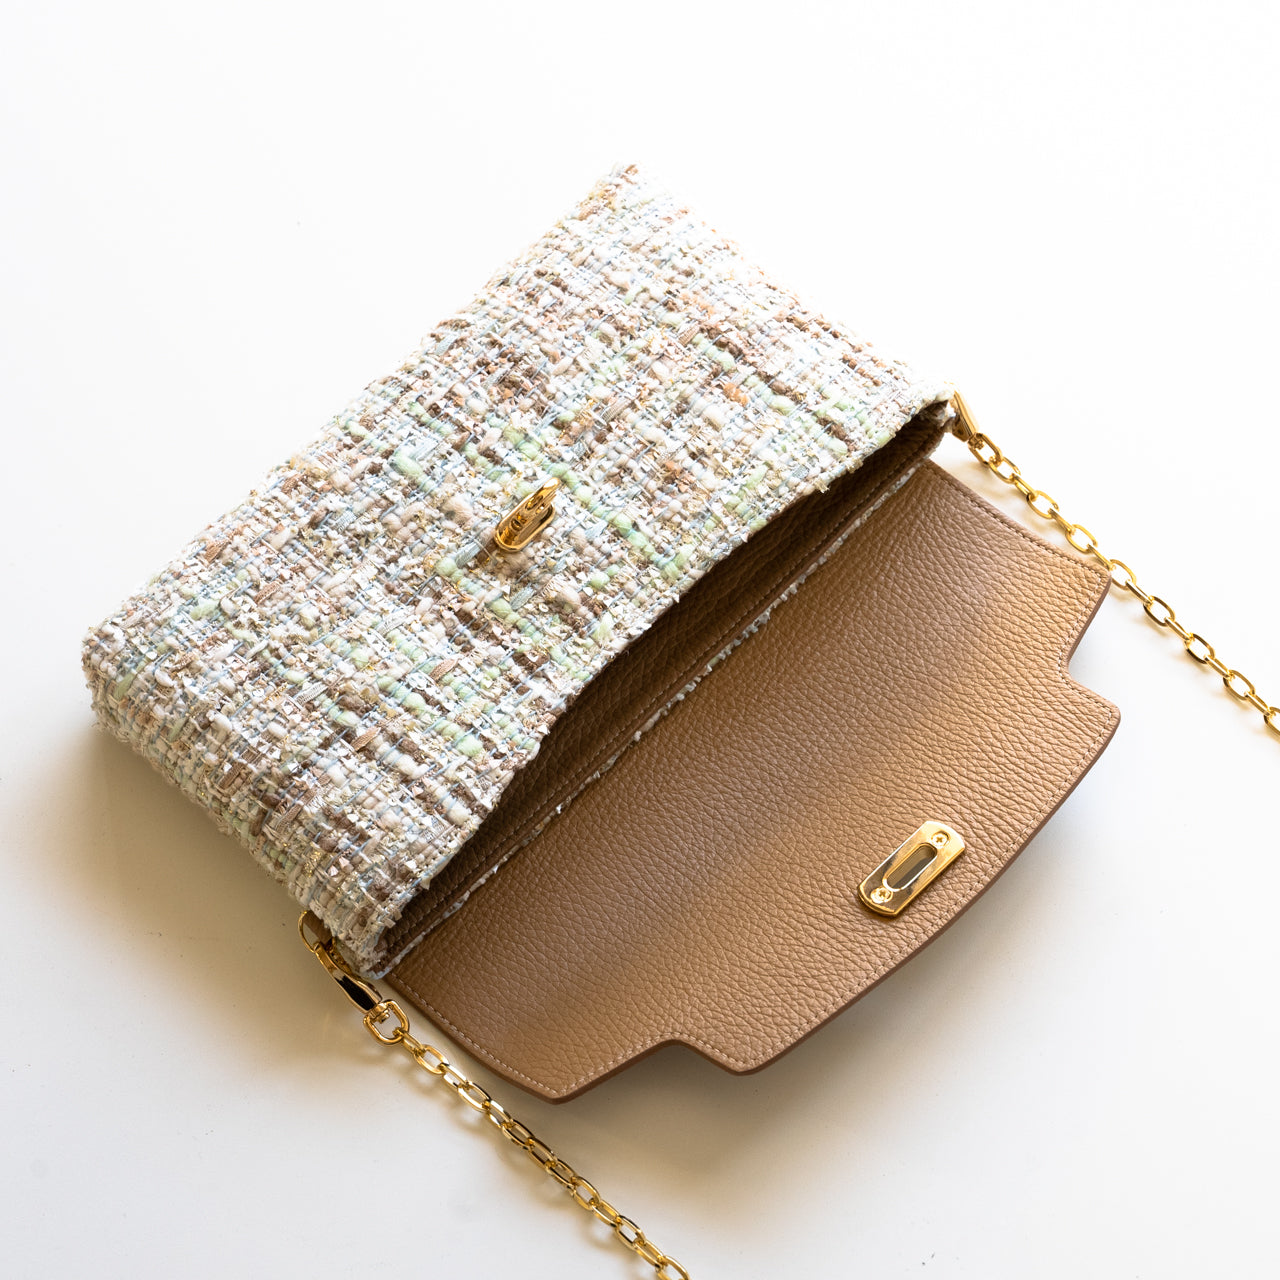 Soft leather flap pouchette / Tweed duo